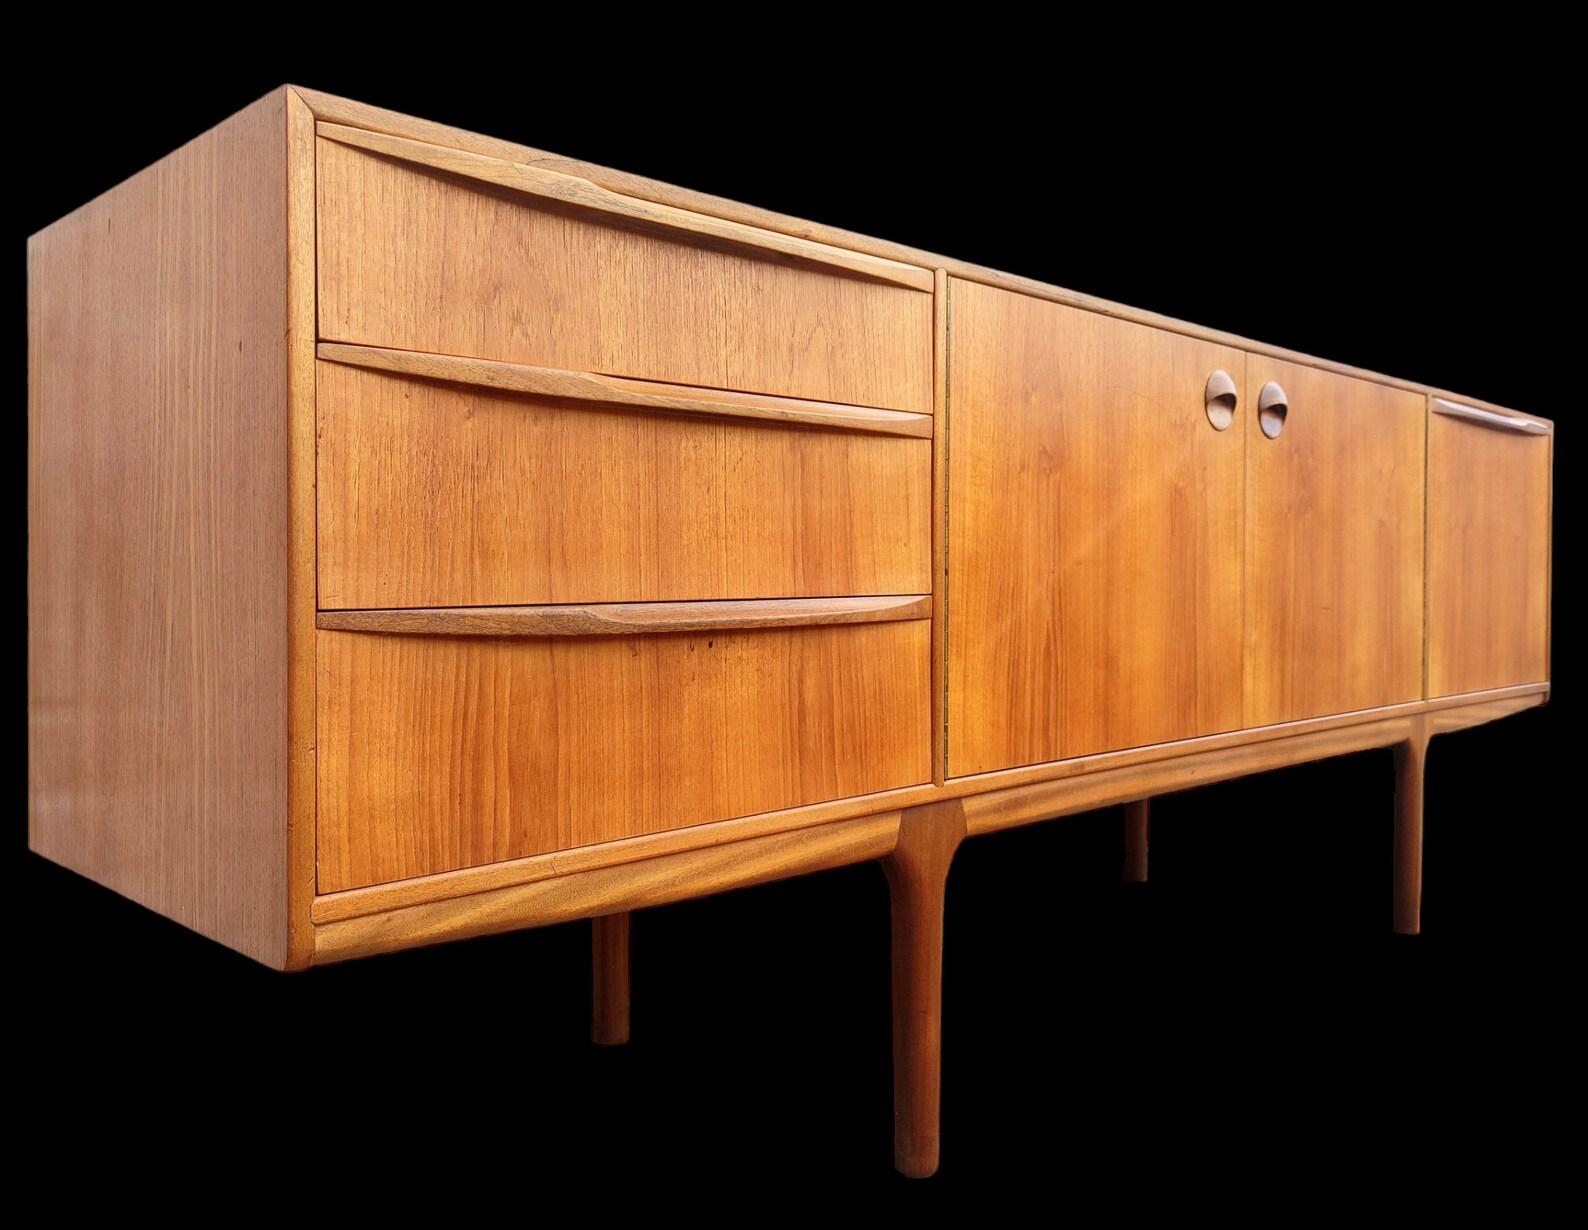 Mid Century Modern McIntosh Teak Sideboards

Above average vintage condition and structurally sound. Has some expected slight finish wear and scratching. Outdoor listing pictures might appear slightly darker or more red than the item does